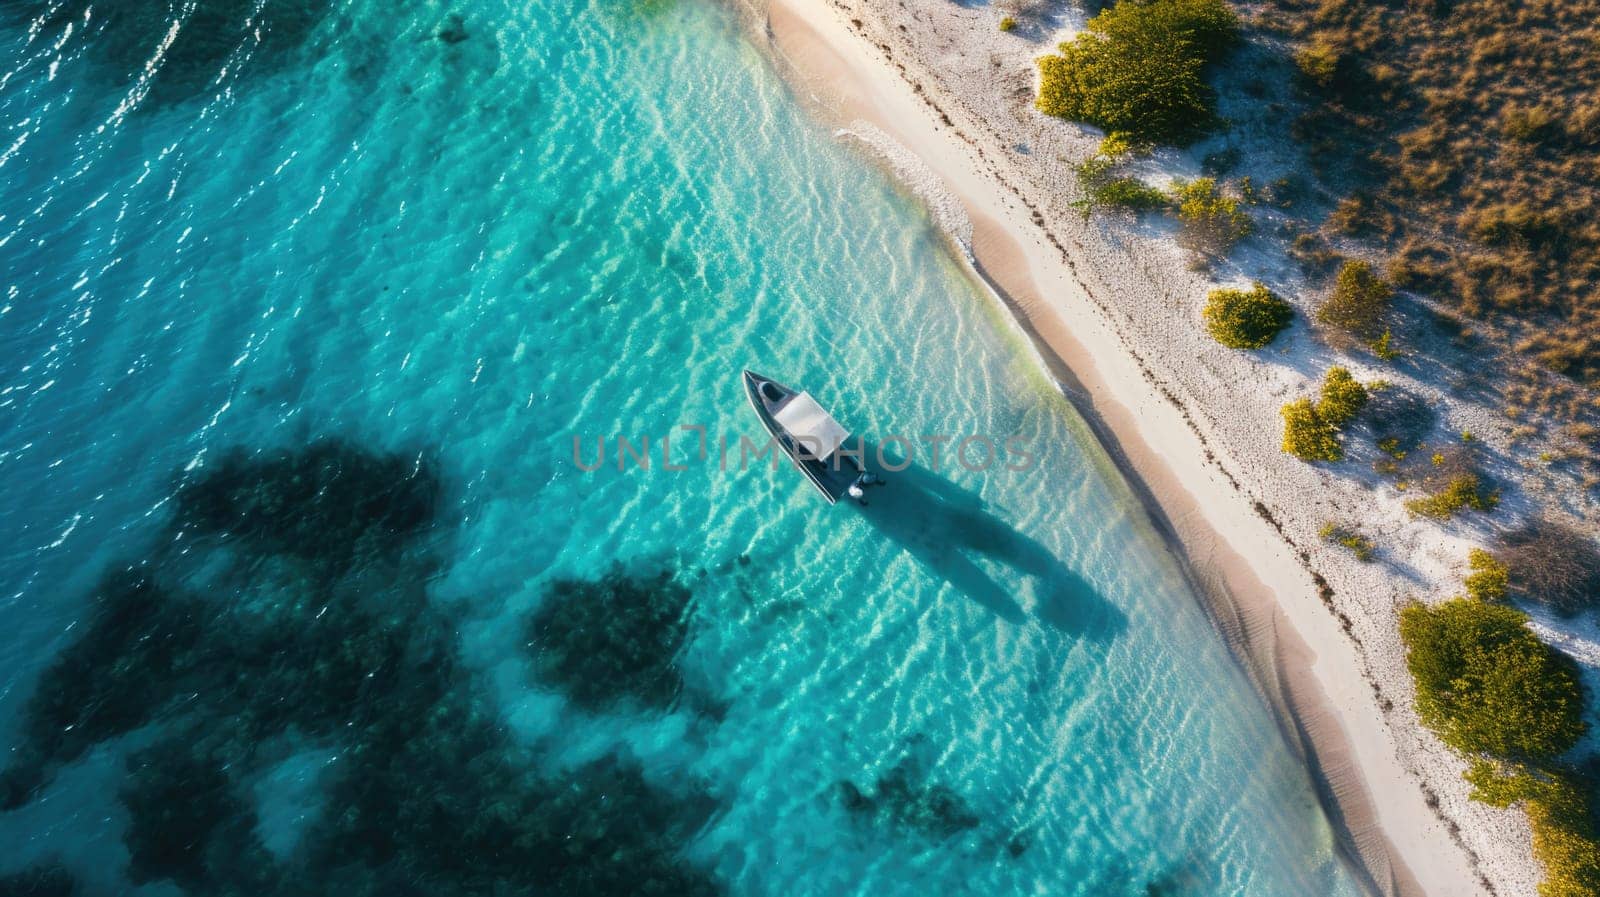 Top view of clear blue sea with boat near shore.